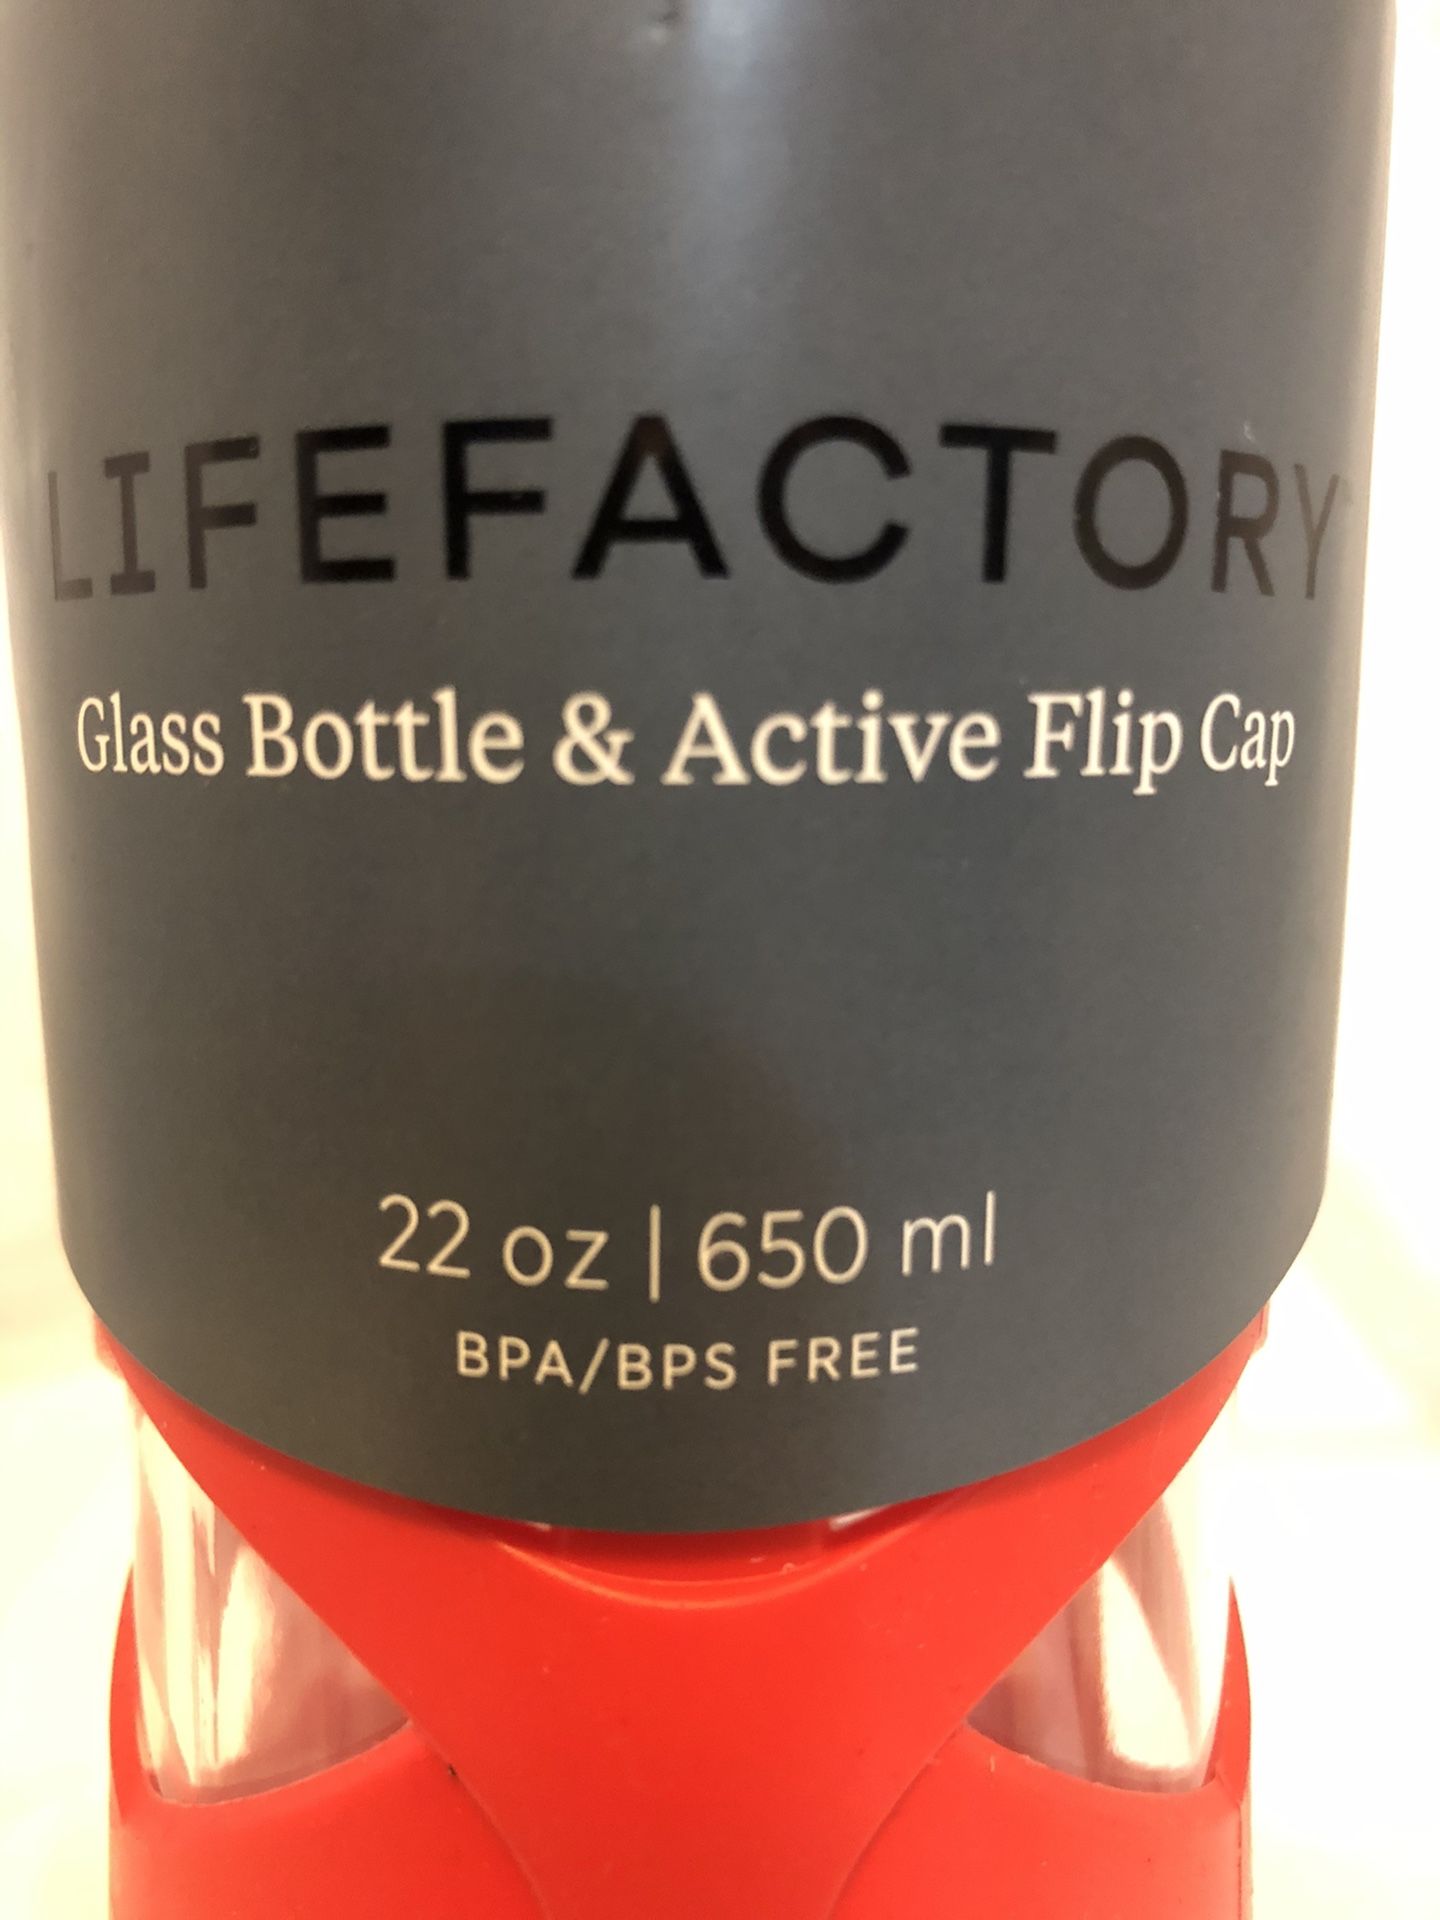 Life Factory Glass Drinking Bottle with Active Flip Cap